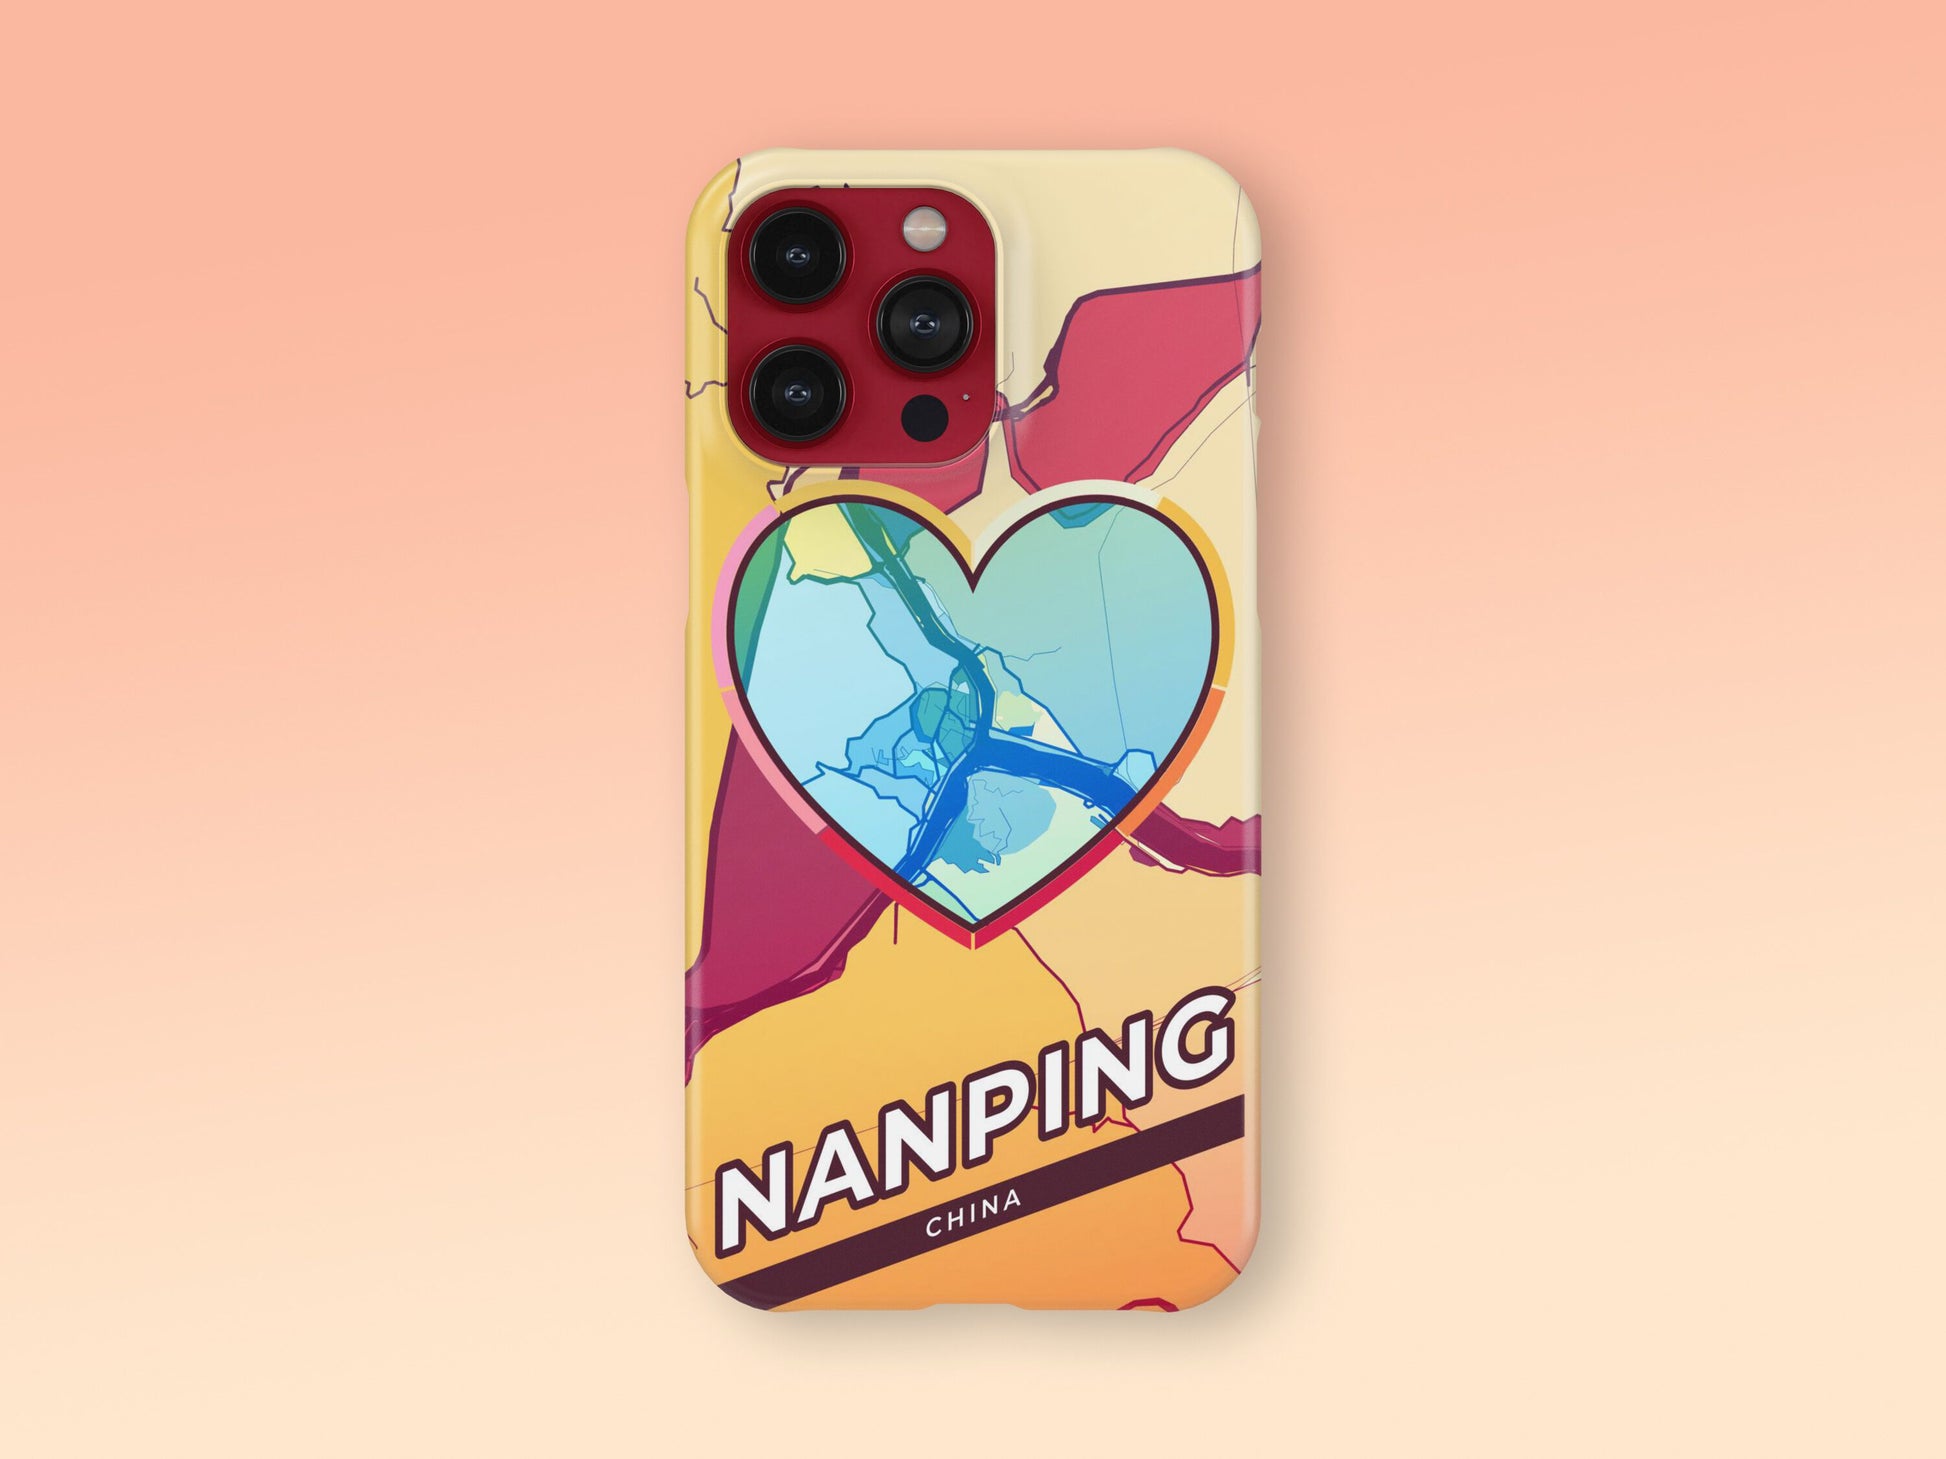 Nanping China slim phone case with colorful icon 2